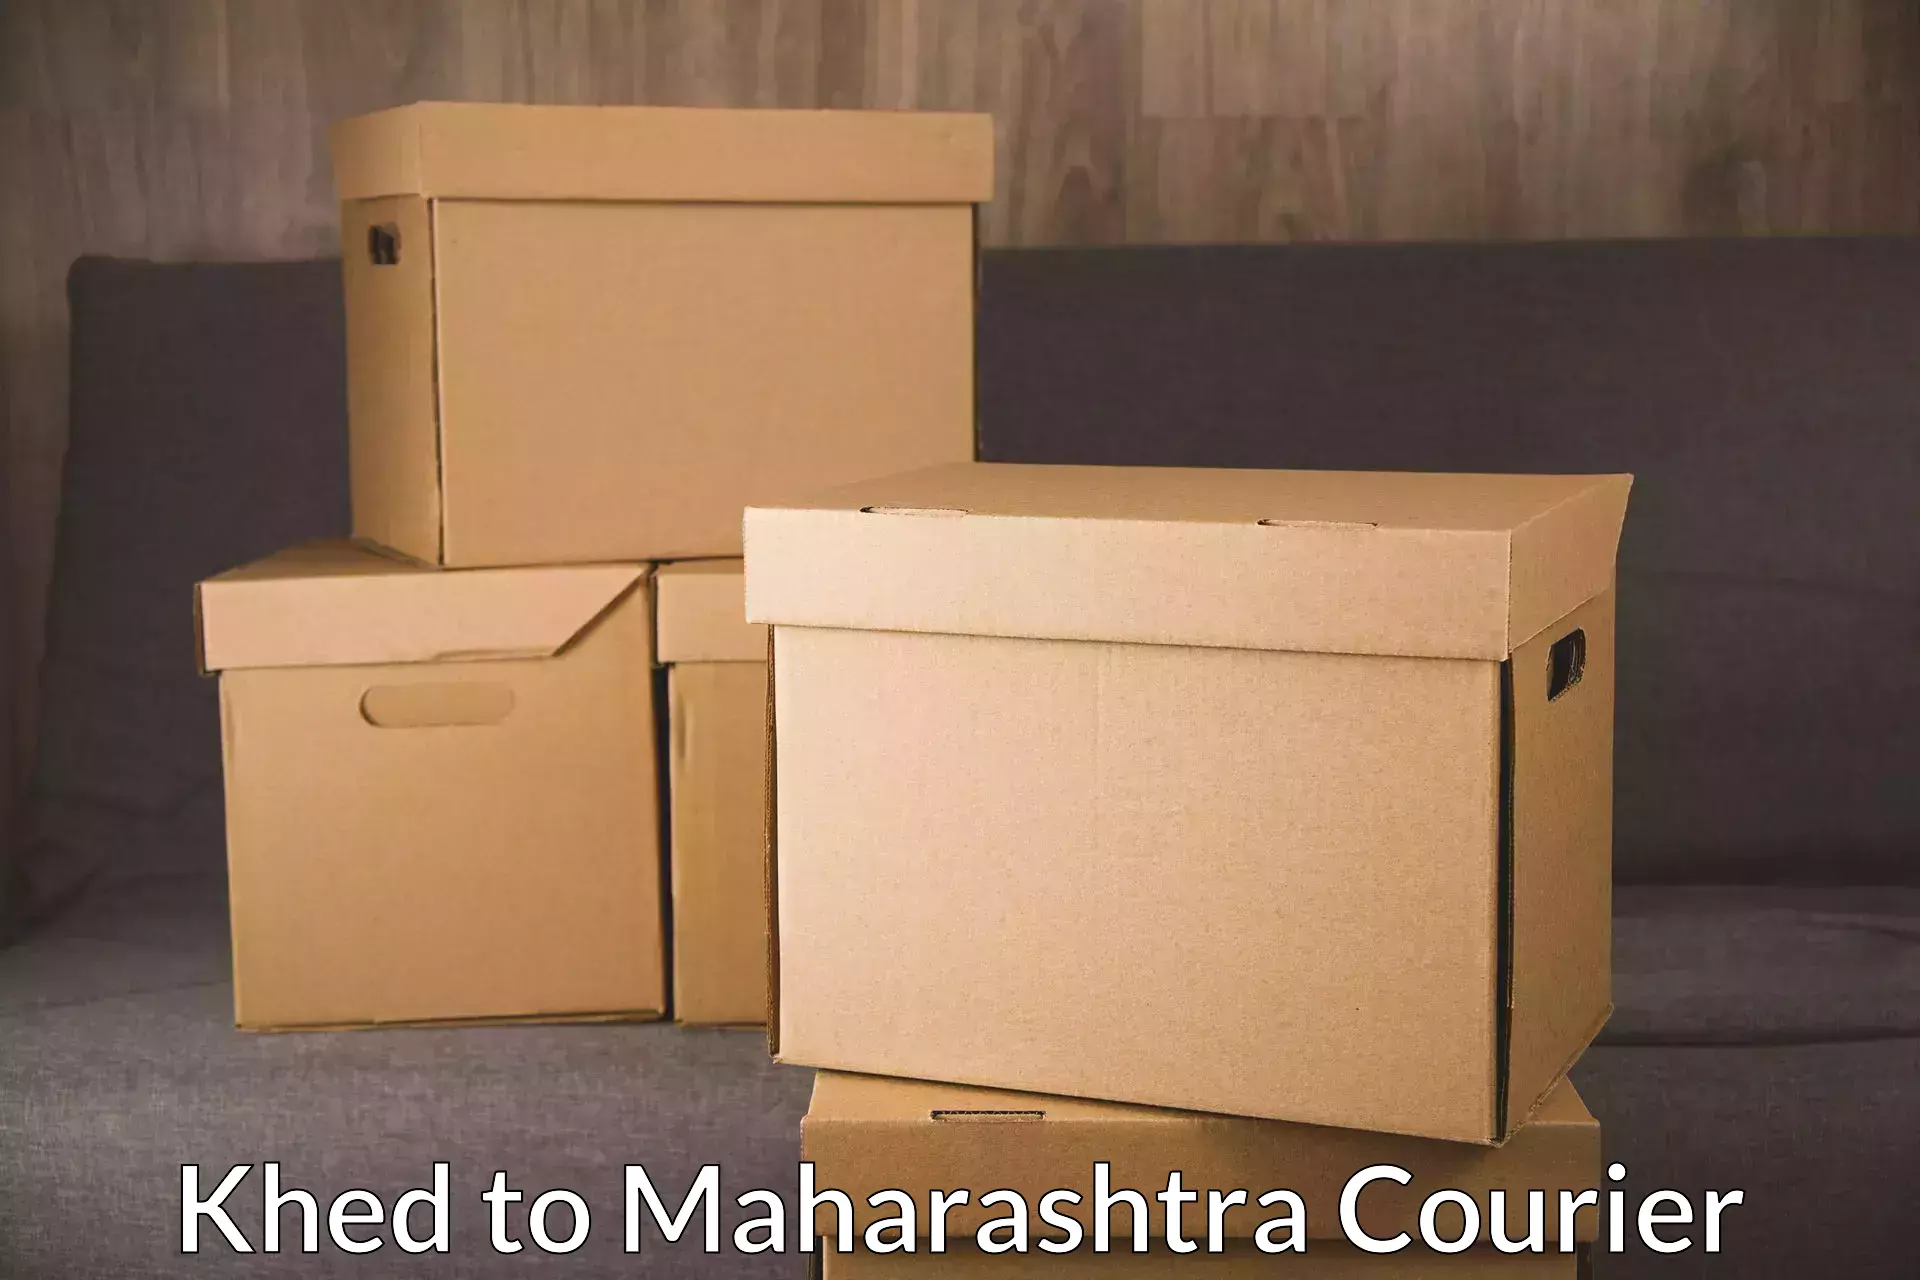 Logistics solutions in Khed to Navi Mumbai